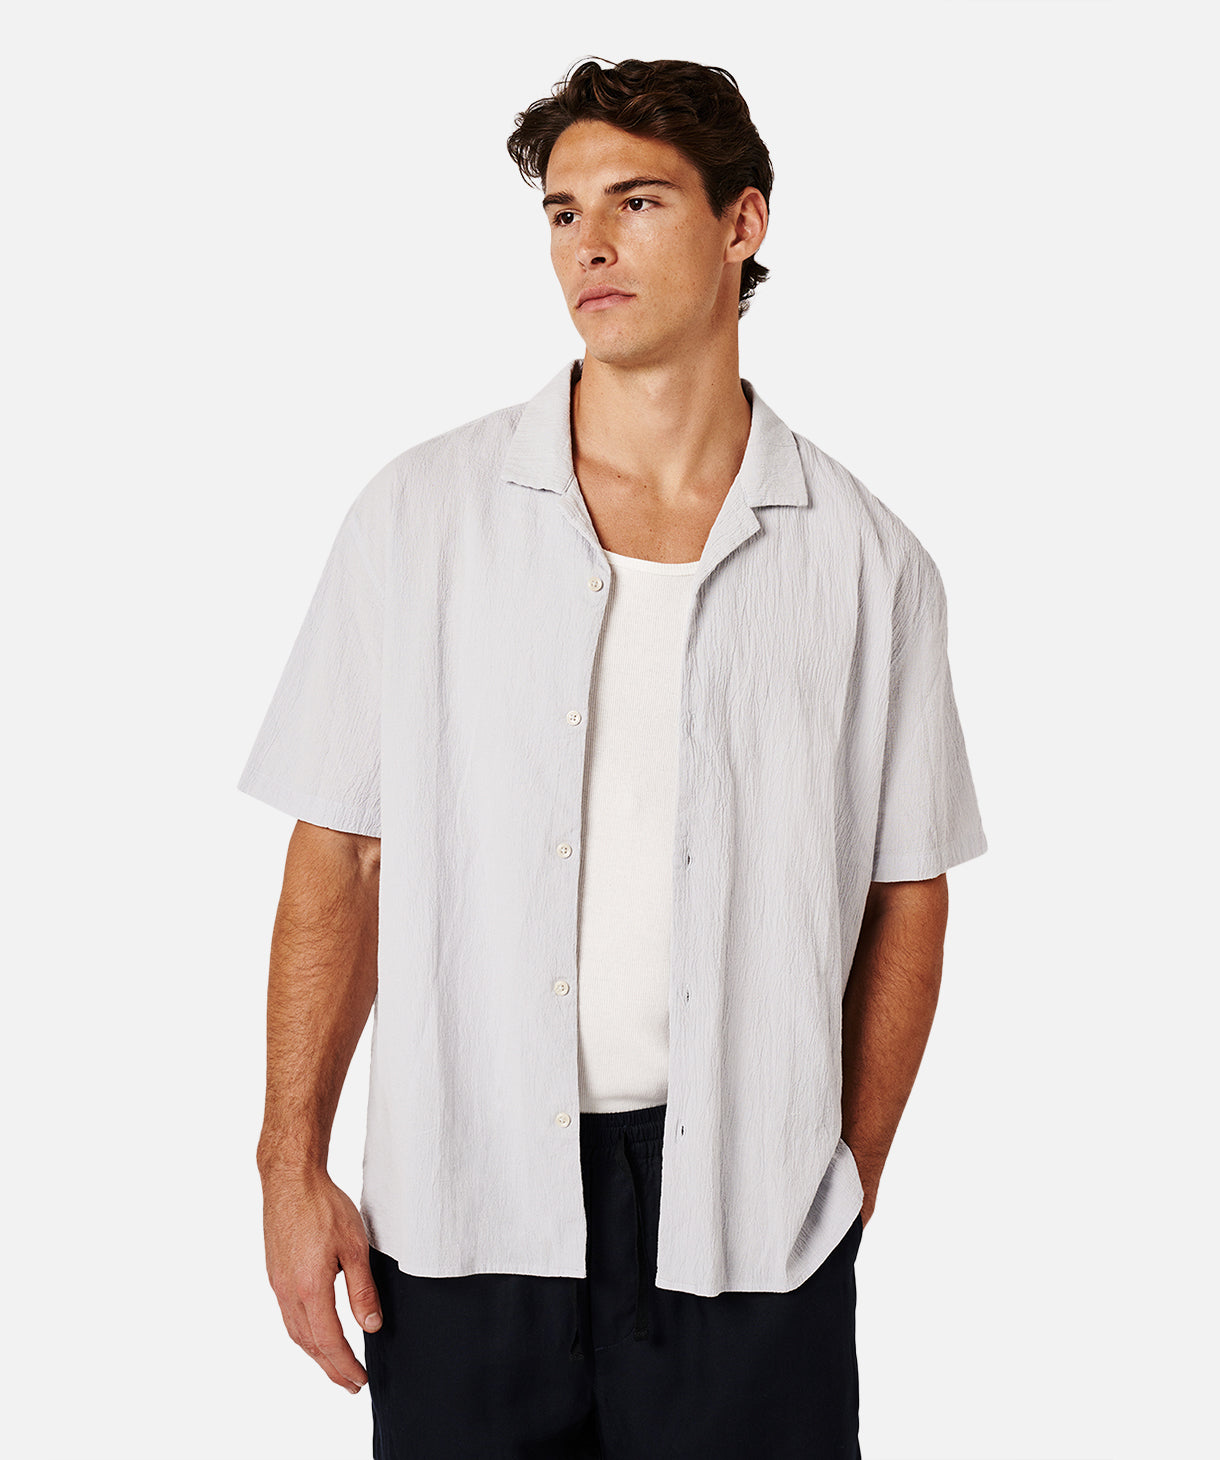 The Magna S/s Shirt - Ash – Industrie Clothing Pty Ltd